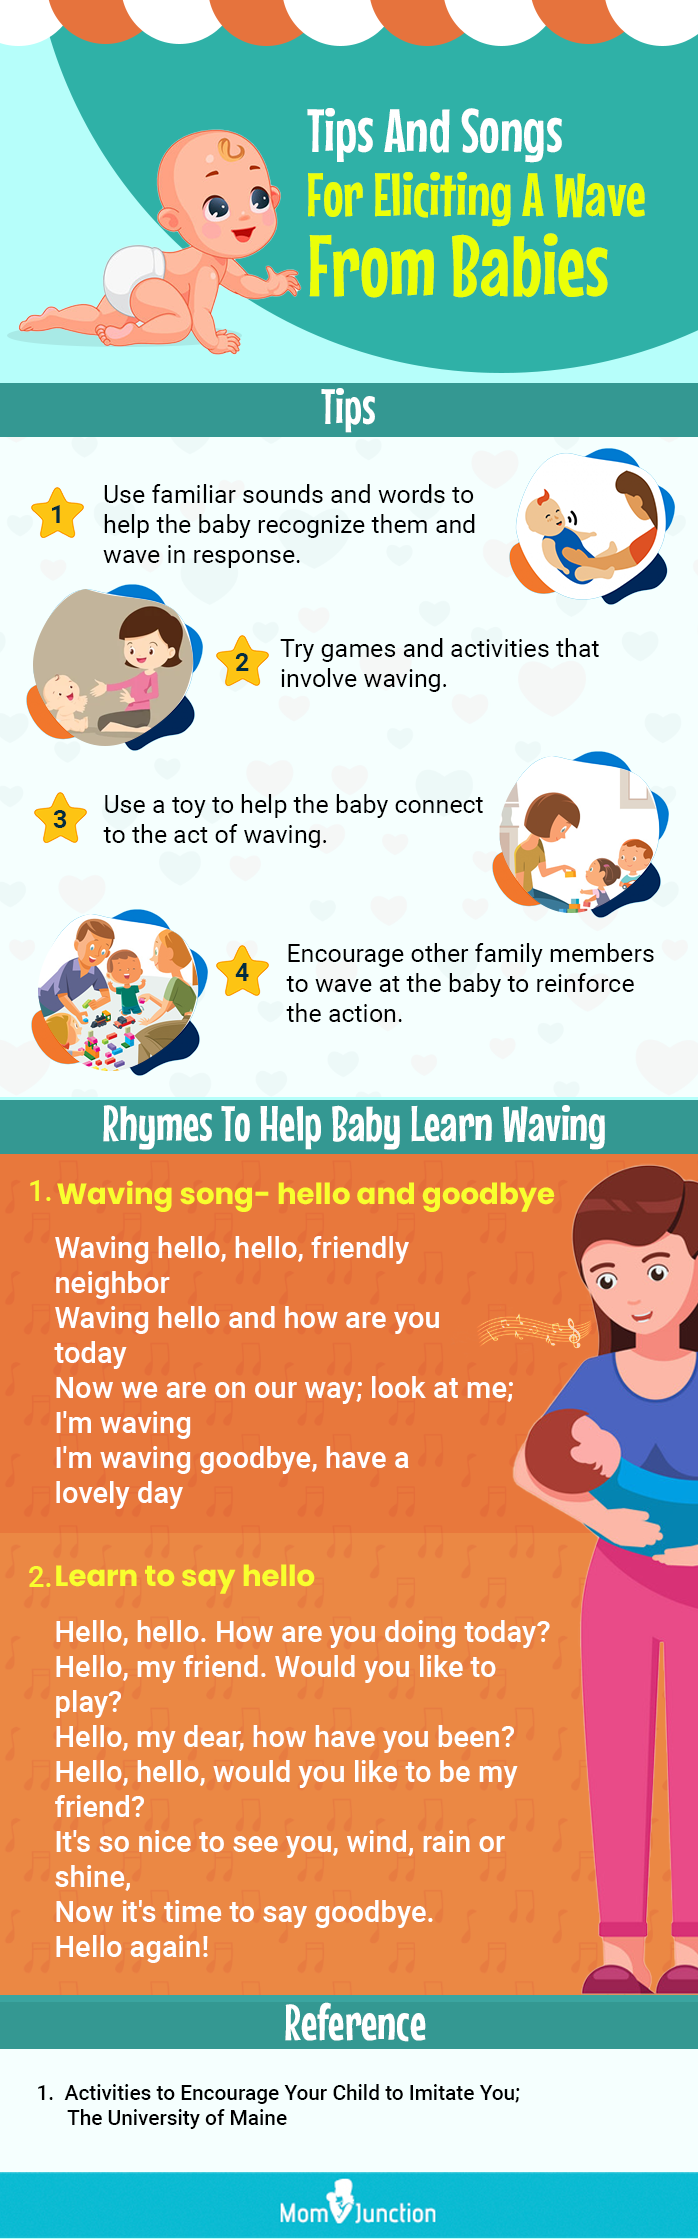 songs for babies [infographic]